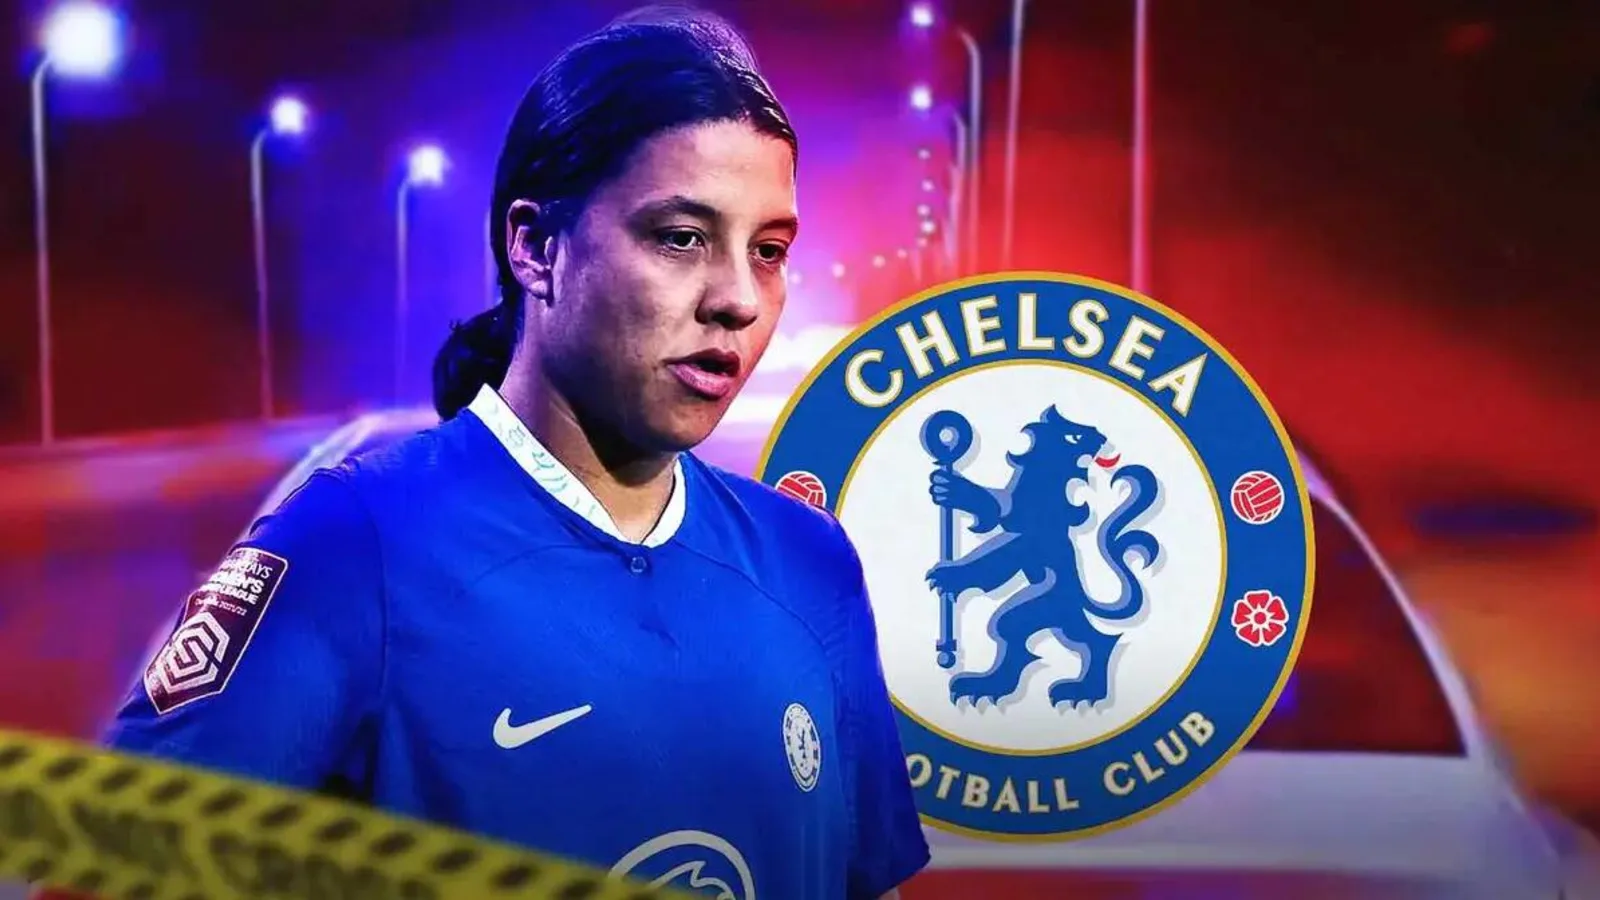 Chelsea star Sam Kerr charges for insulting and threatening a police officer comes to light